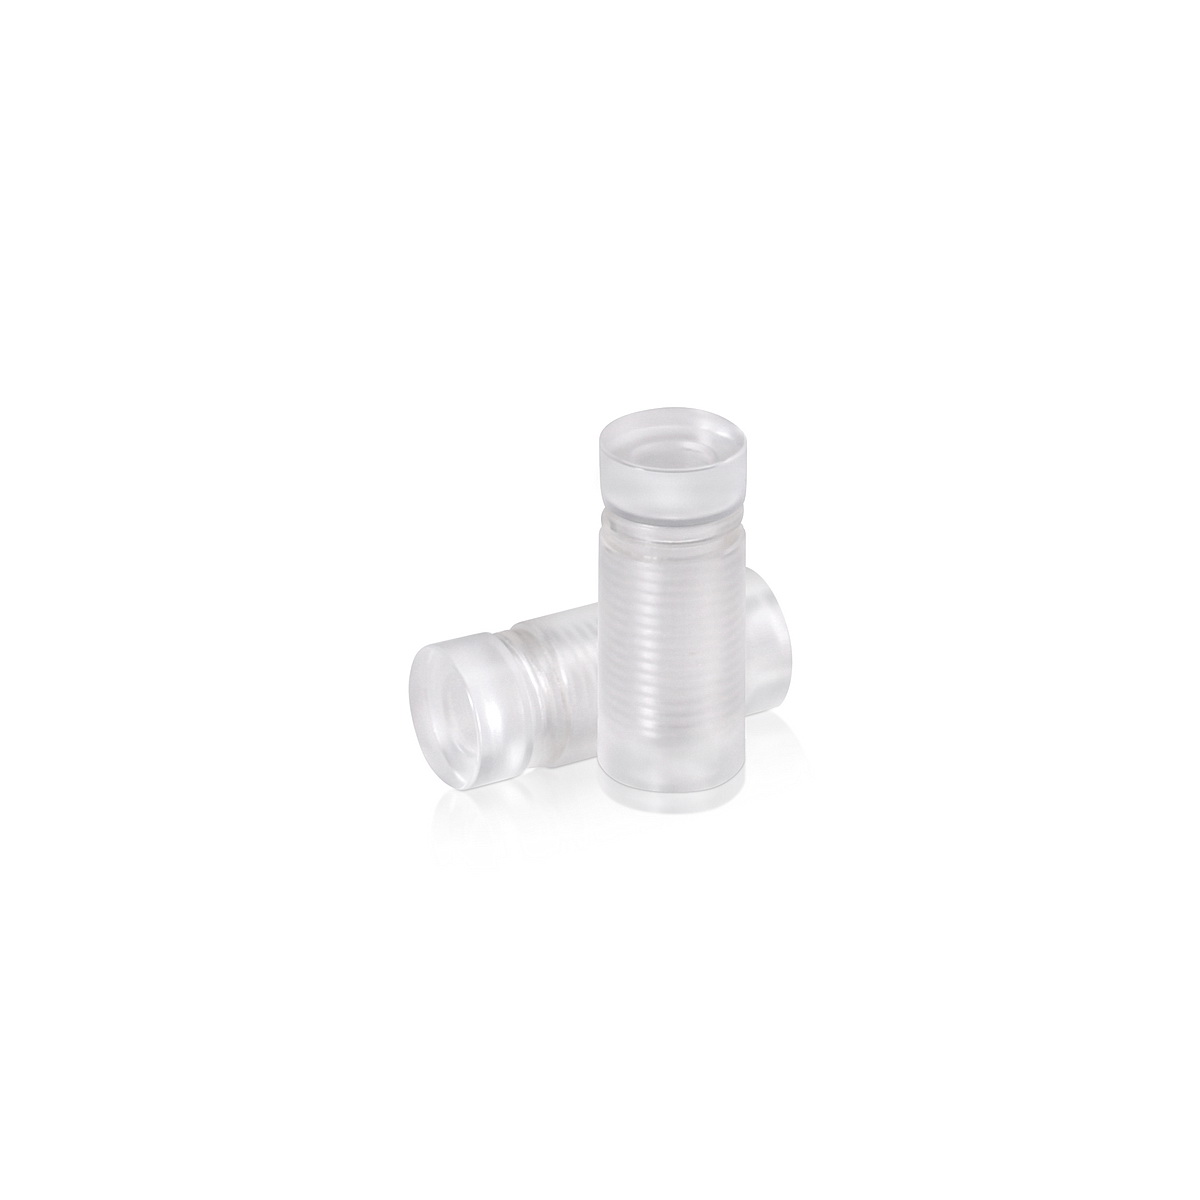 5/8'' Diameter X 1/2'' Barrel Length, Clear Acrylic Standoff. Easy Fasten Standoff (For Inside Use Only) Tamper Proof [Required Material Hole Size: 3/8'']